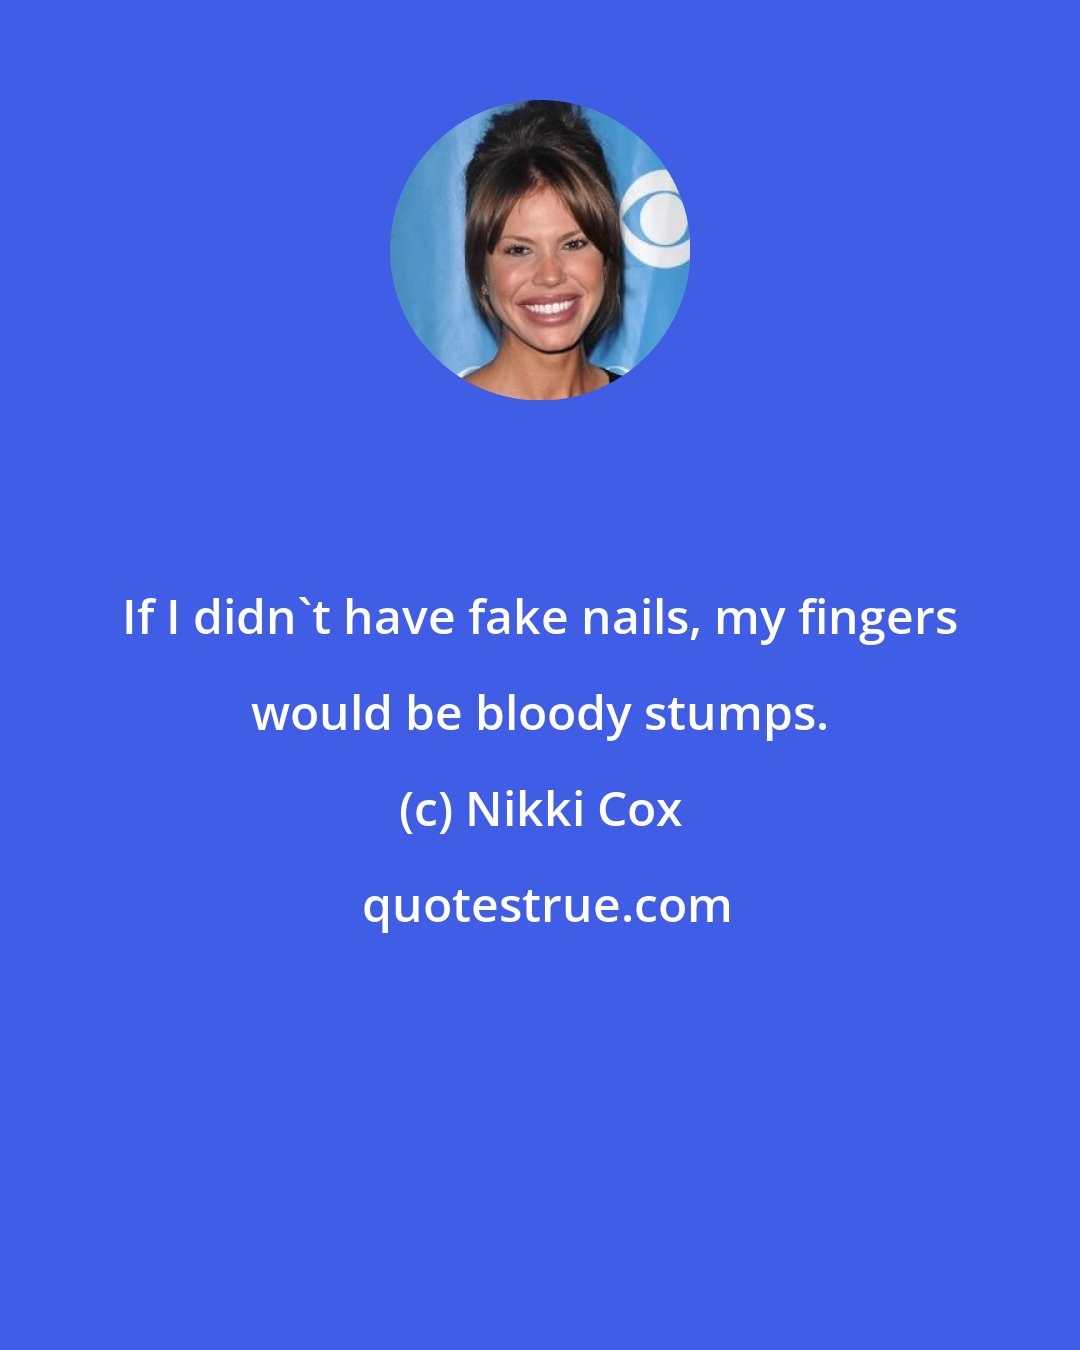 Nikki Cox: If I didn't have fake nails, my fingers would be bloody stumps.